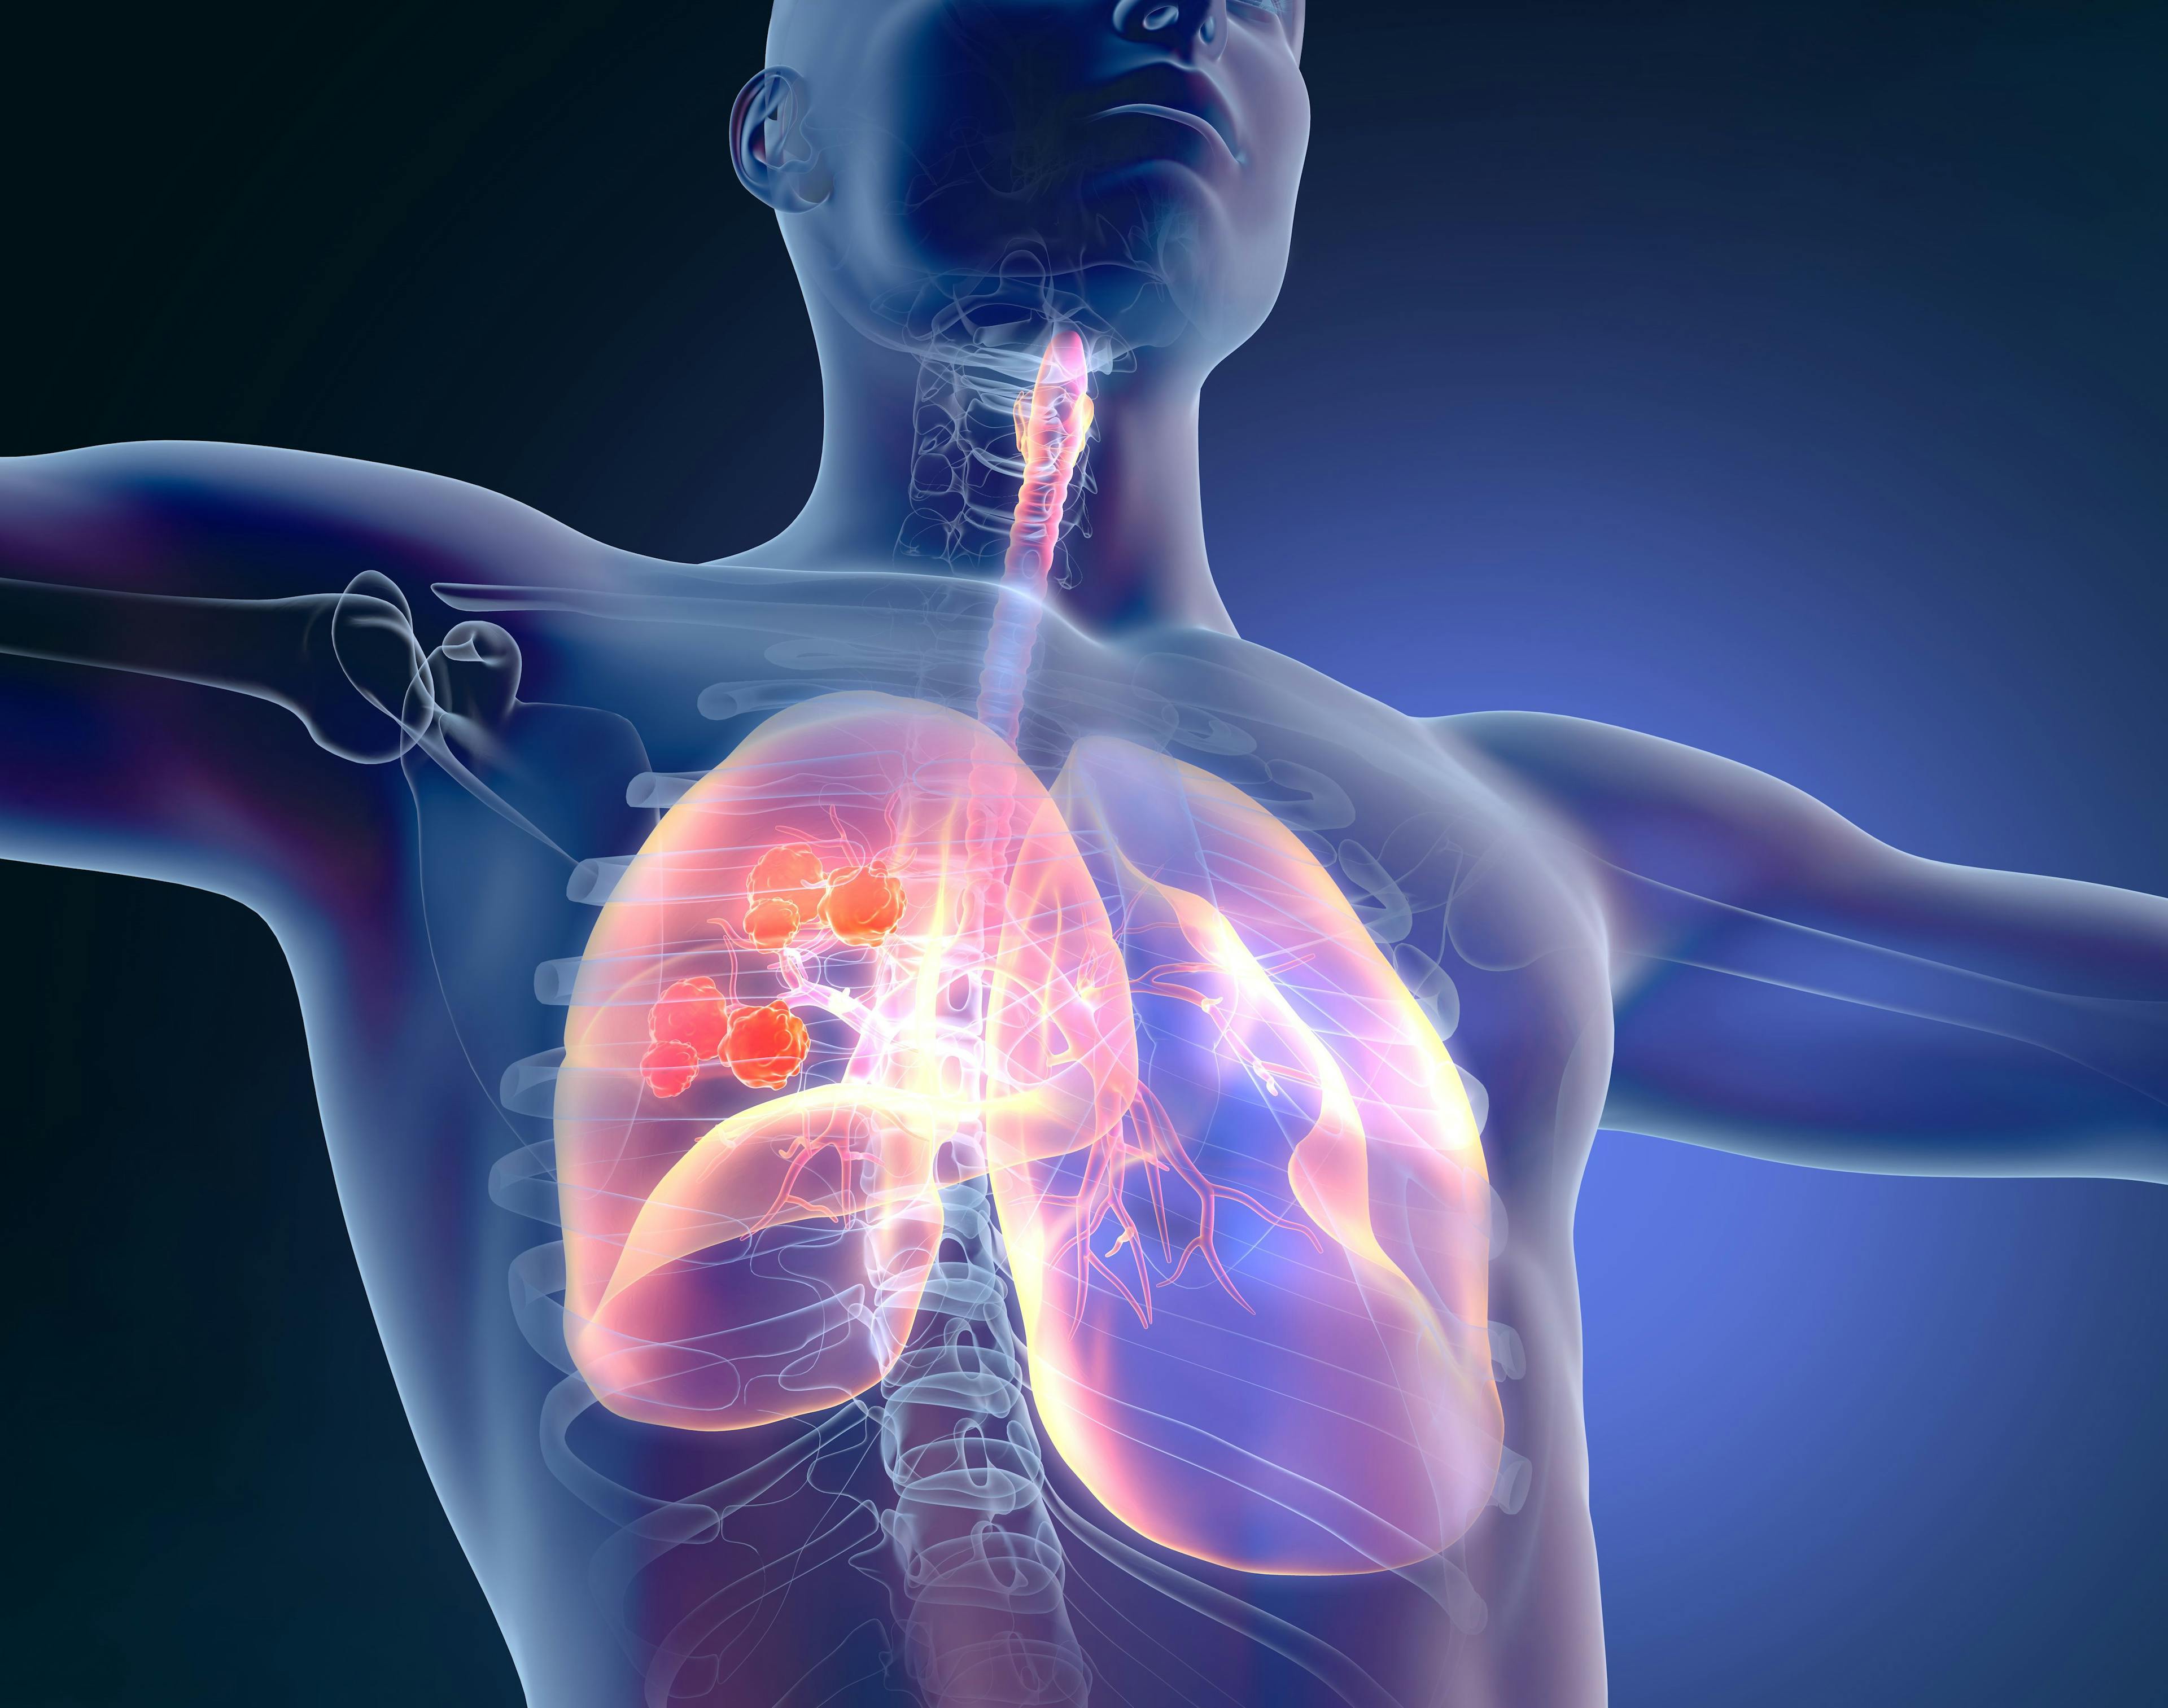 Strong Efficacy and Safety Data Observed With Telisotuzumab Vedotin for c-Met+ NSCLC